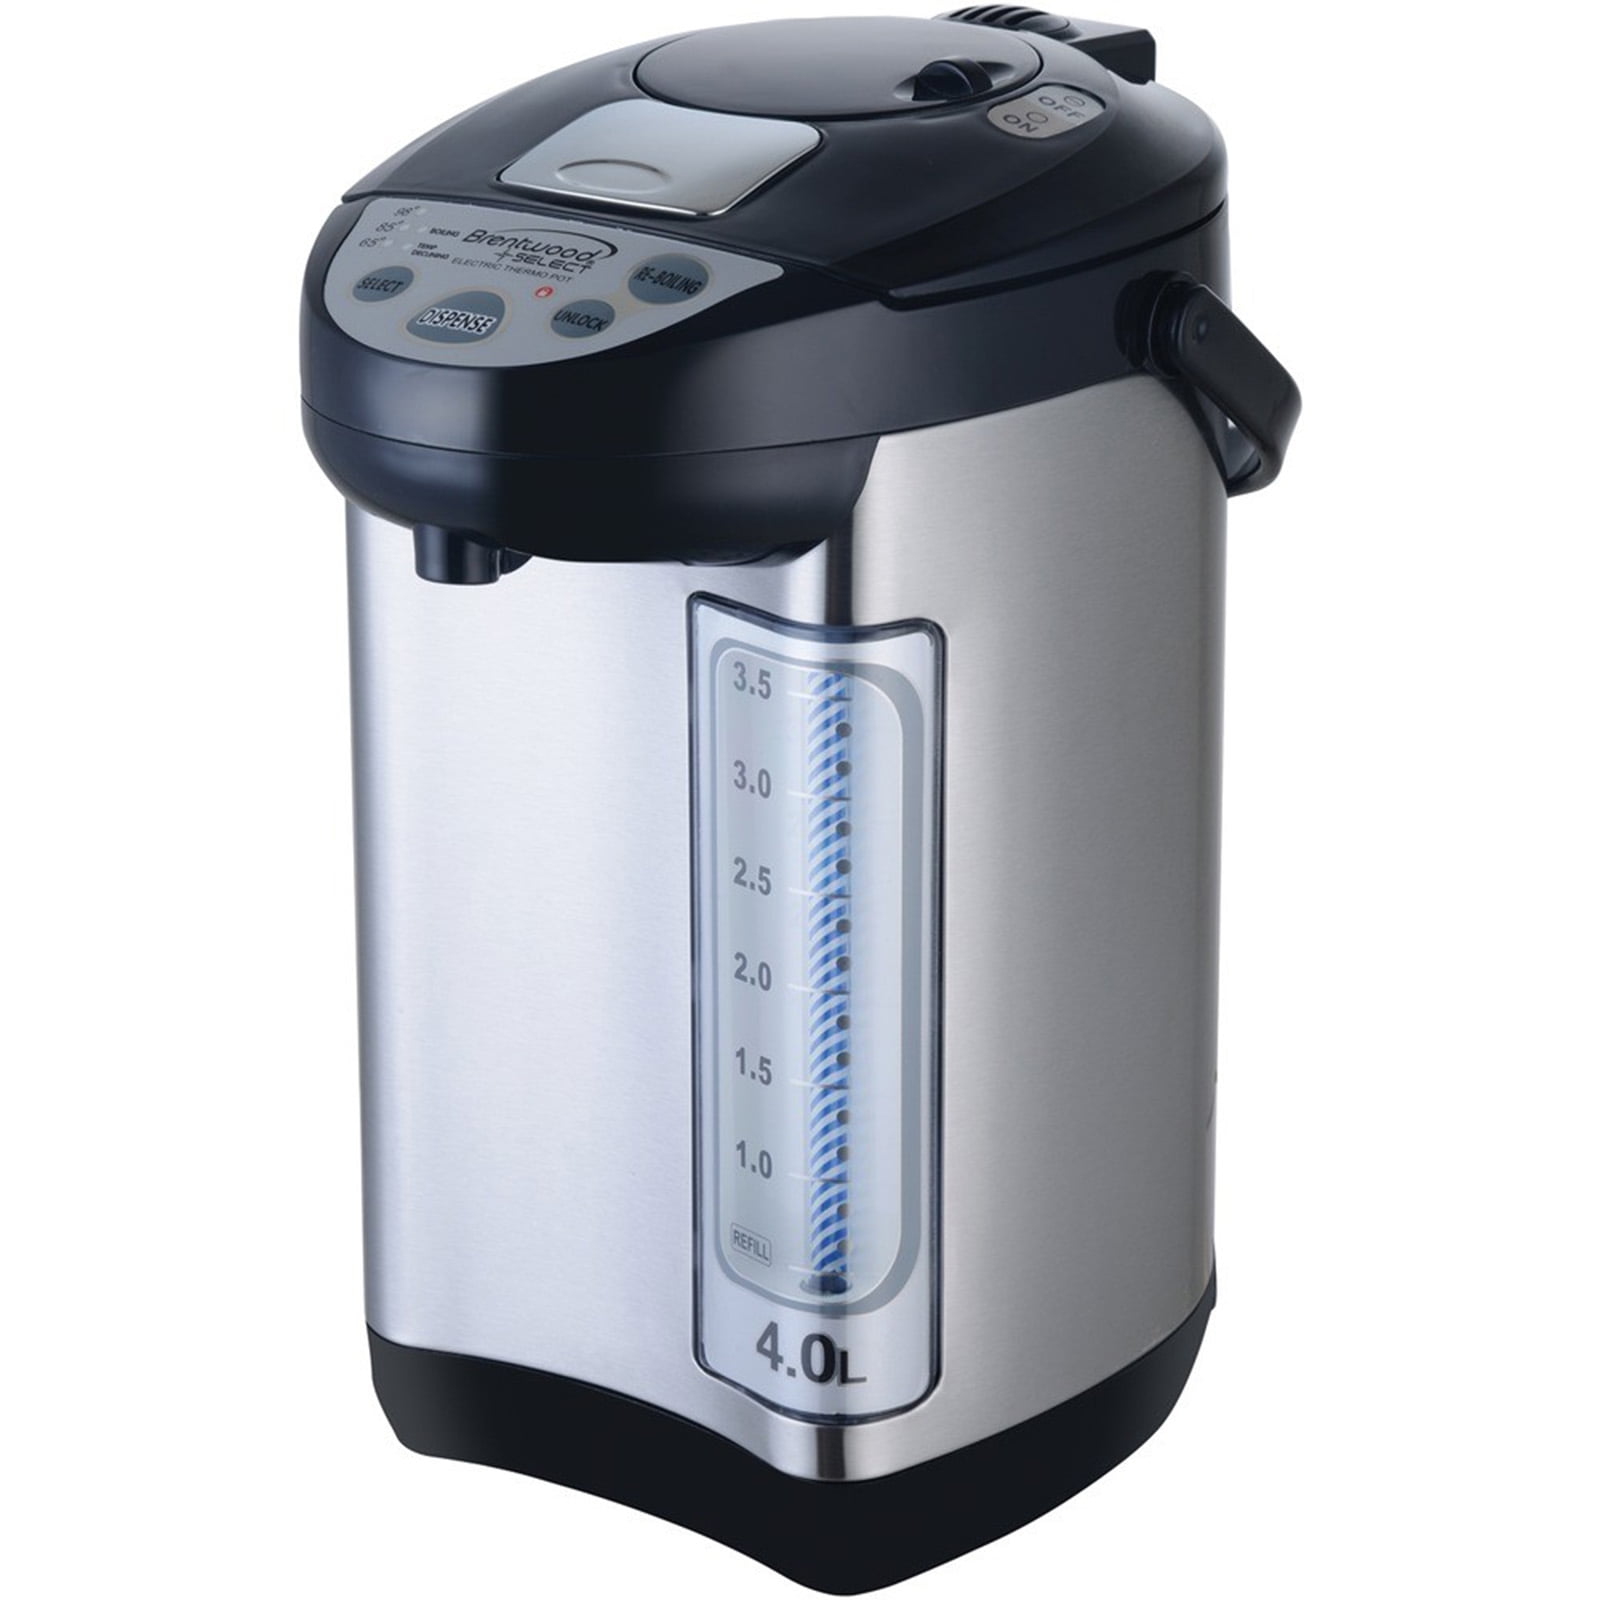 Tiger PDU Electric Water Boiler and Warmer 3L/4L/5L - Made in Japan - Hello  Kitchen & Home